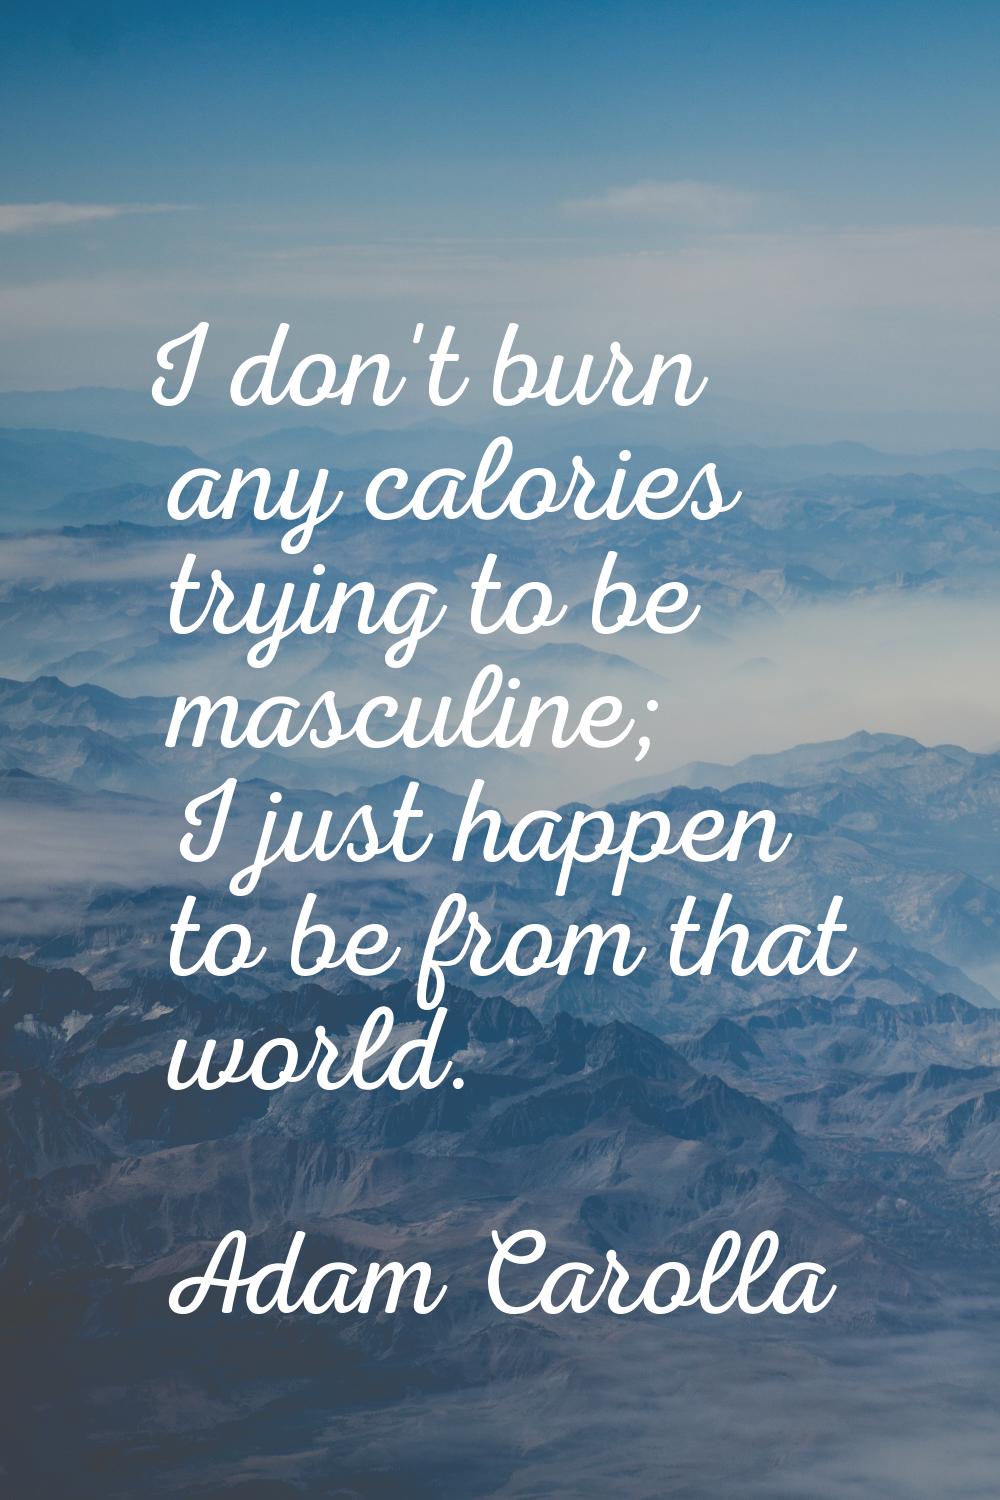 I don't burn any calories trying to be masculine; I just happen to be from that world.